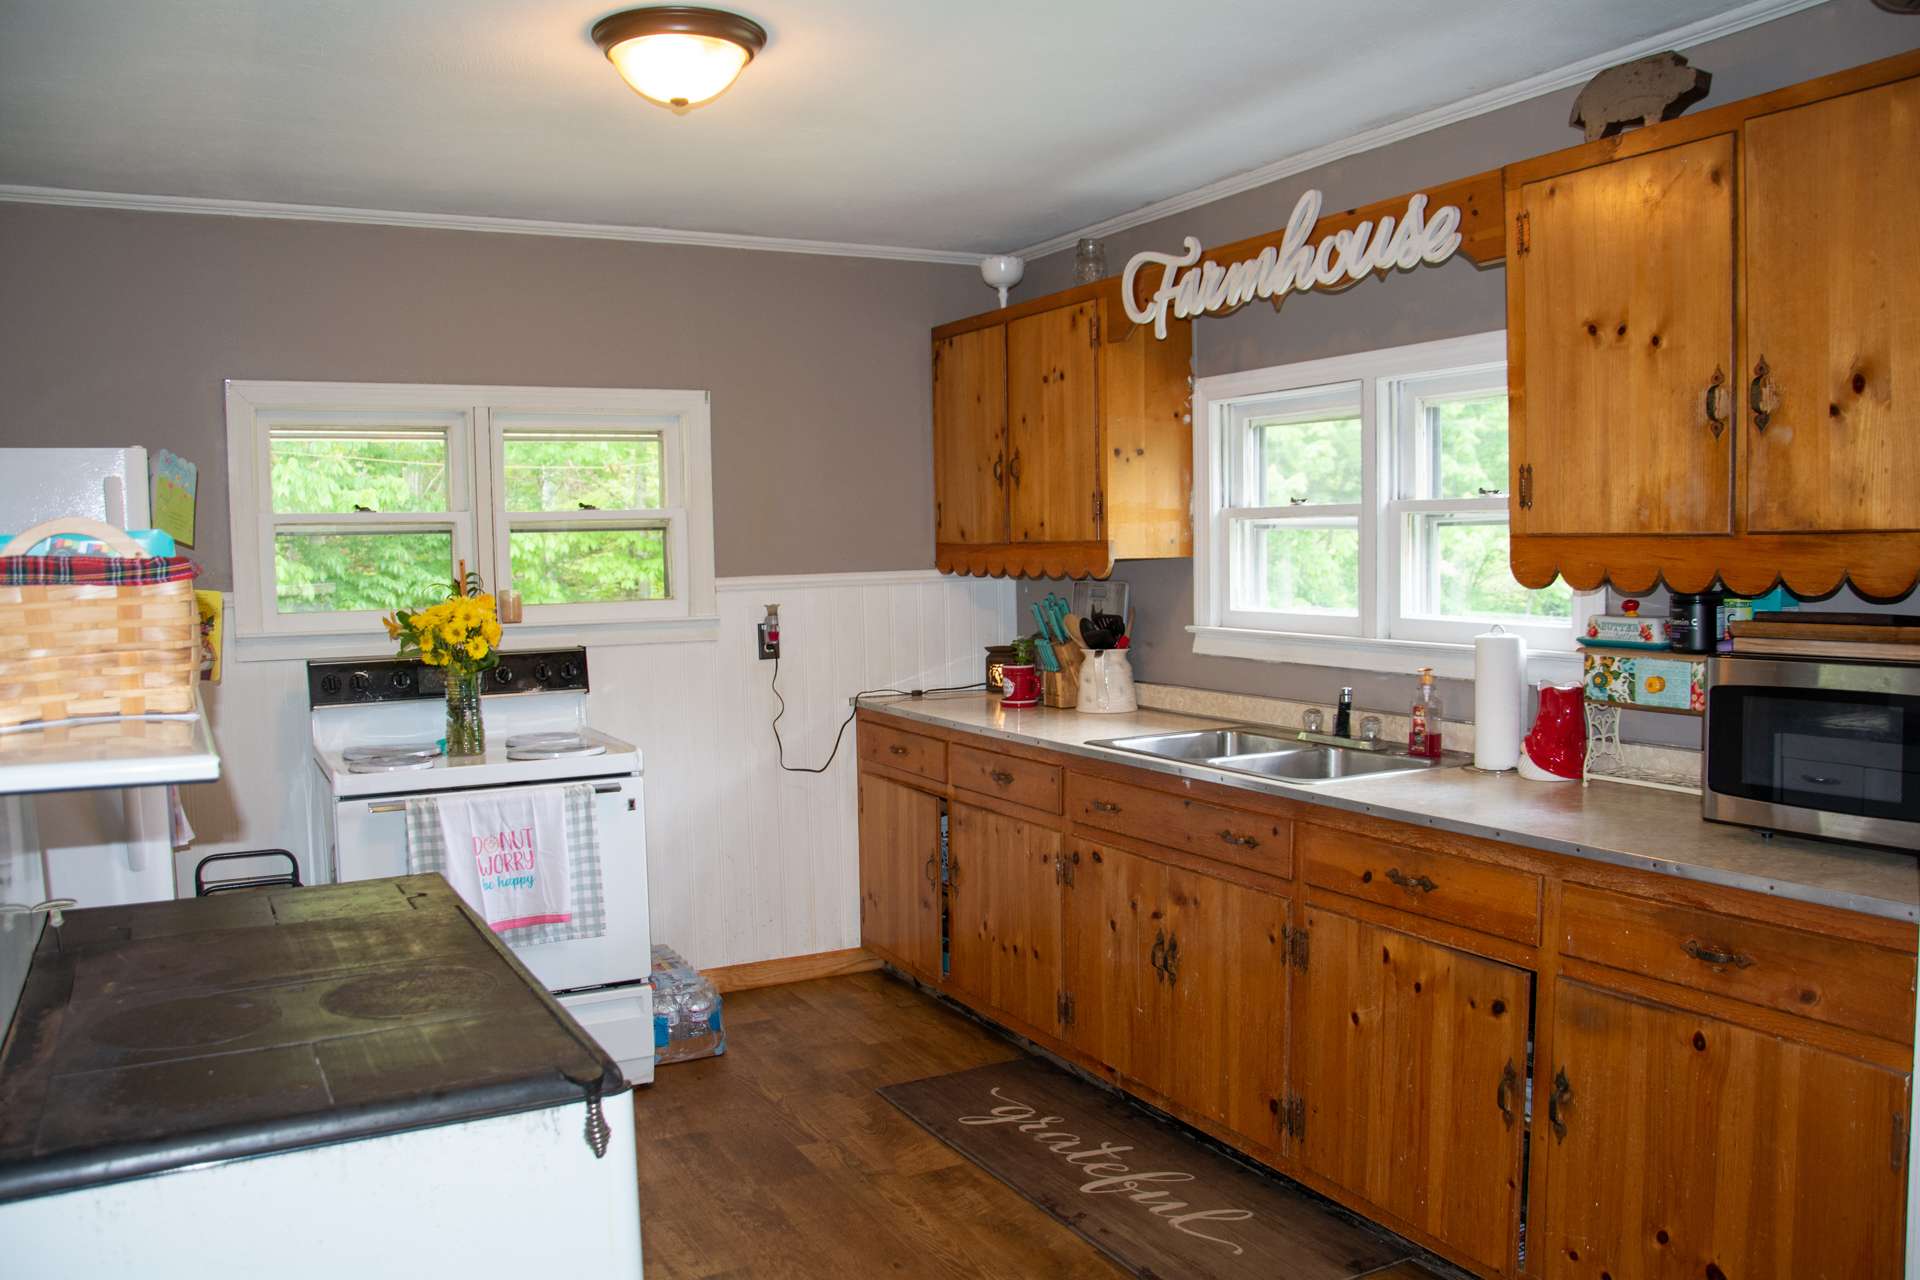 You will fall in love with farmhouse style kitchen complete with operational antique wood cook stove.